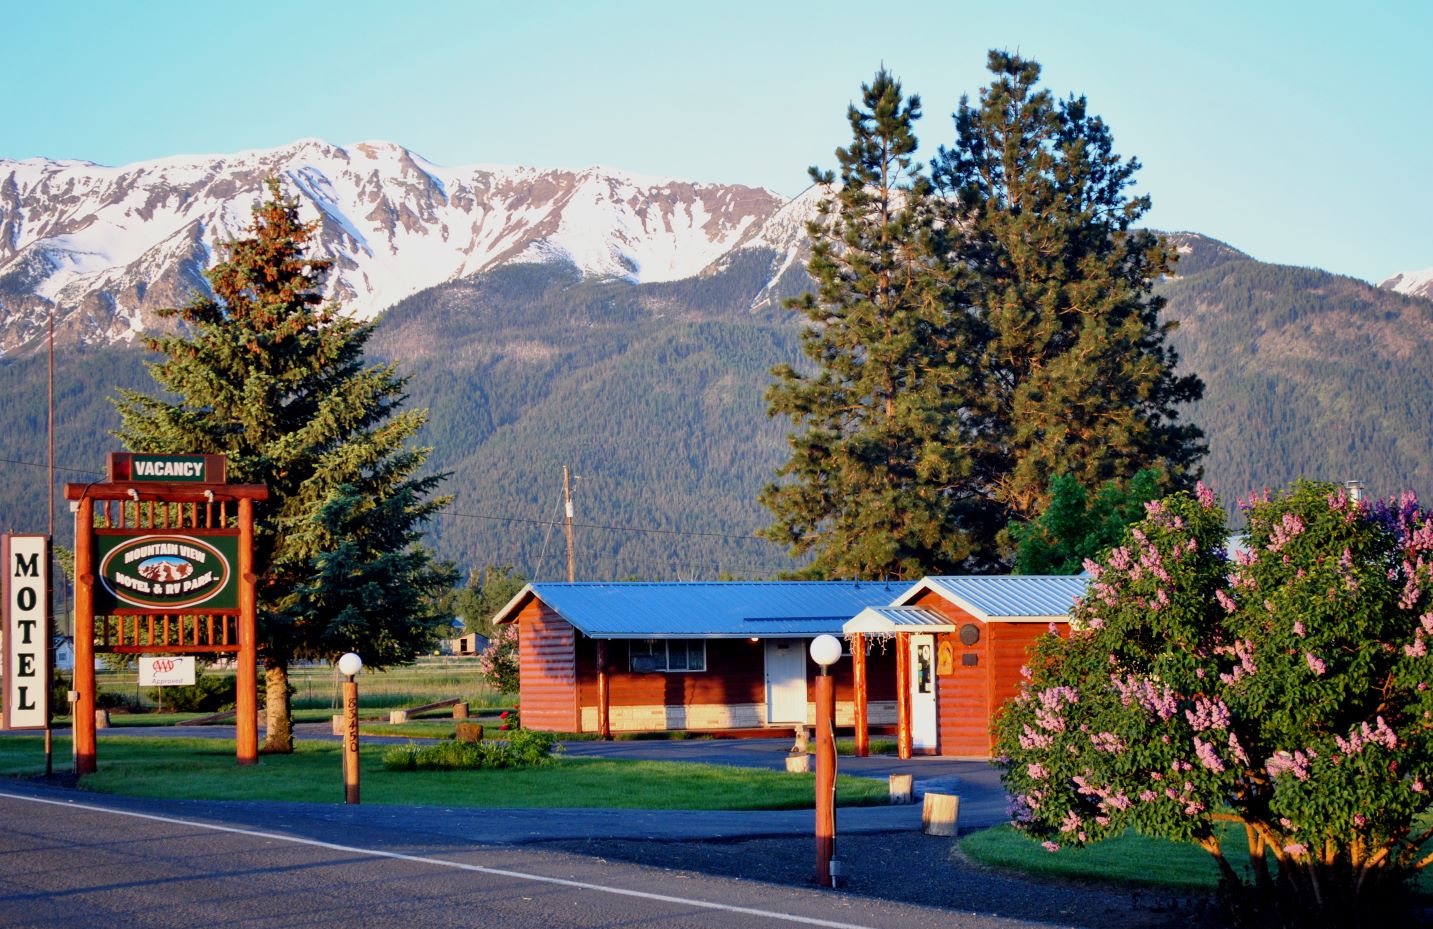 View of front of Motel / RV Park in Spring